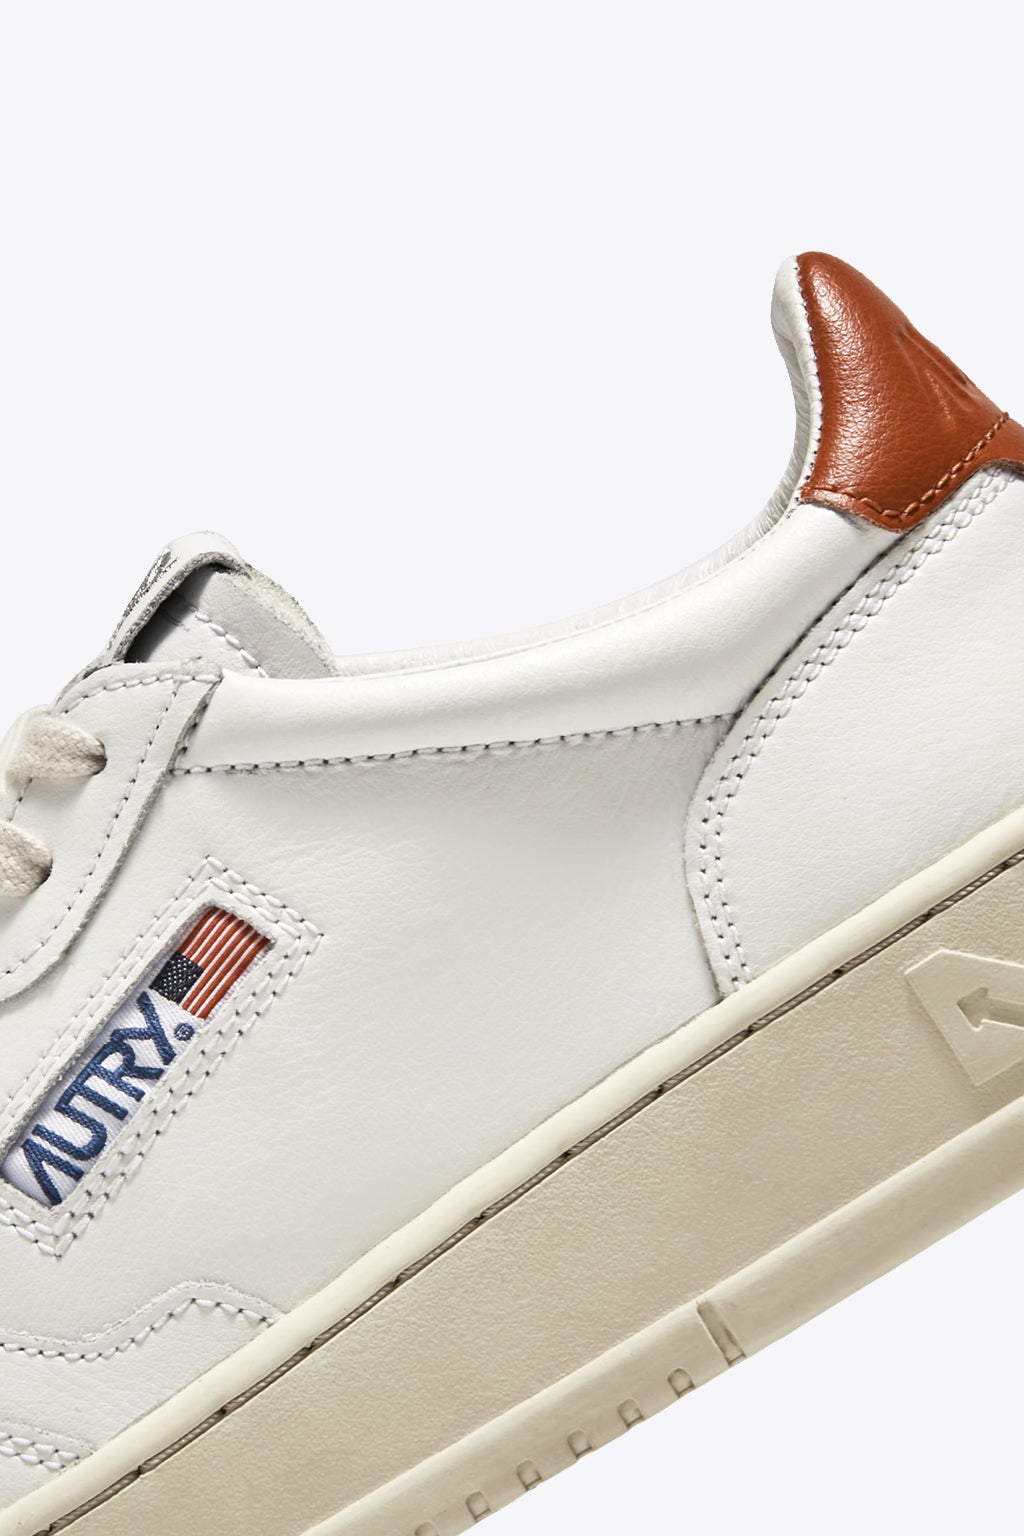 alt-image__White-leather-low-sneaker-with-rust-tab--Medalist